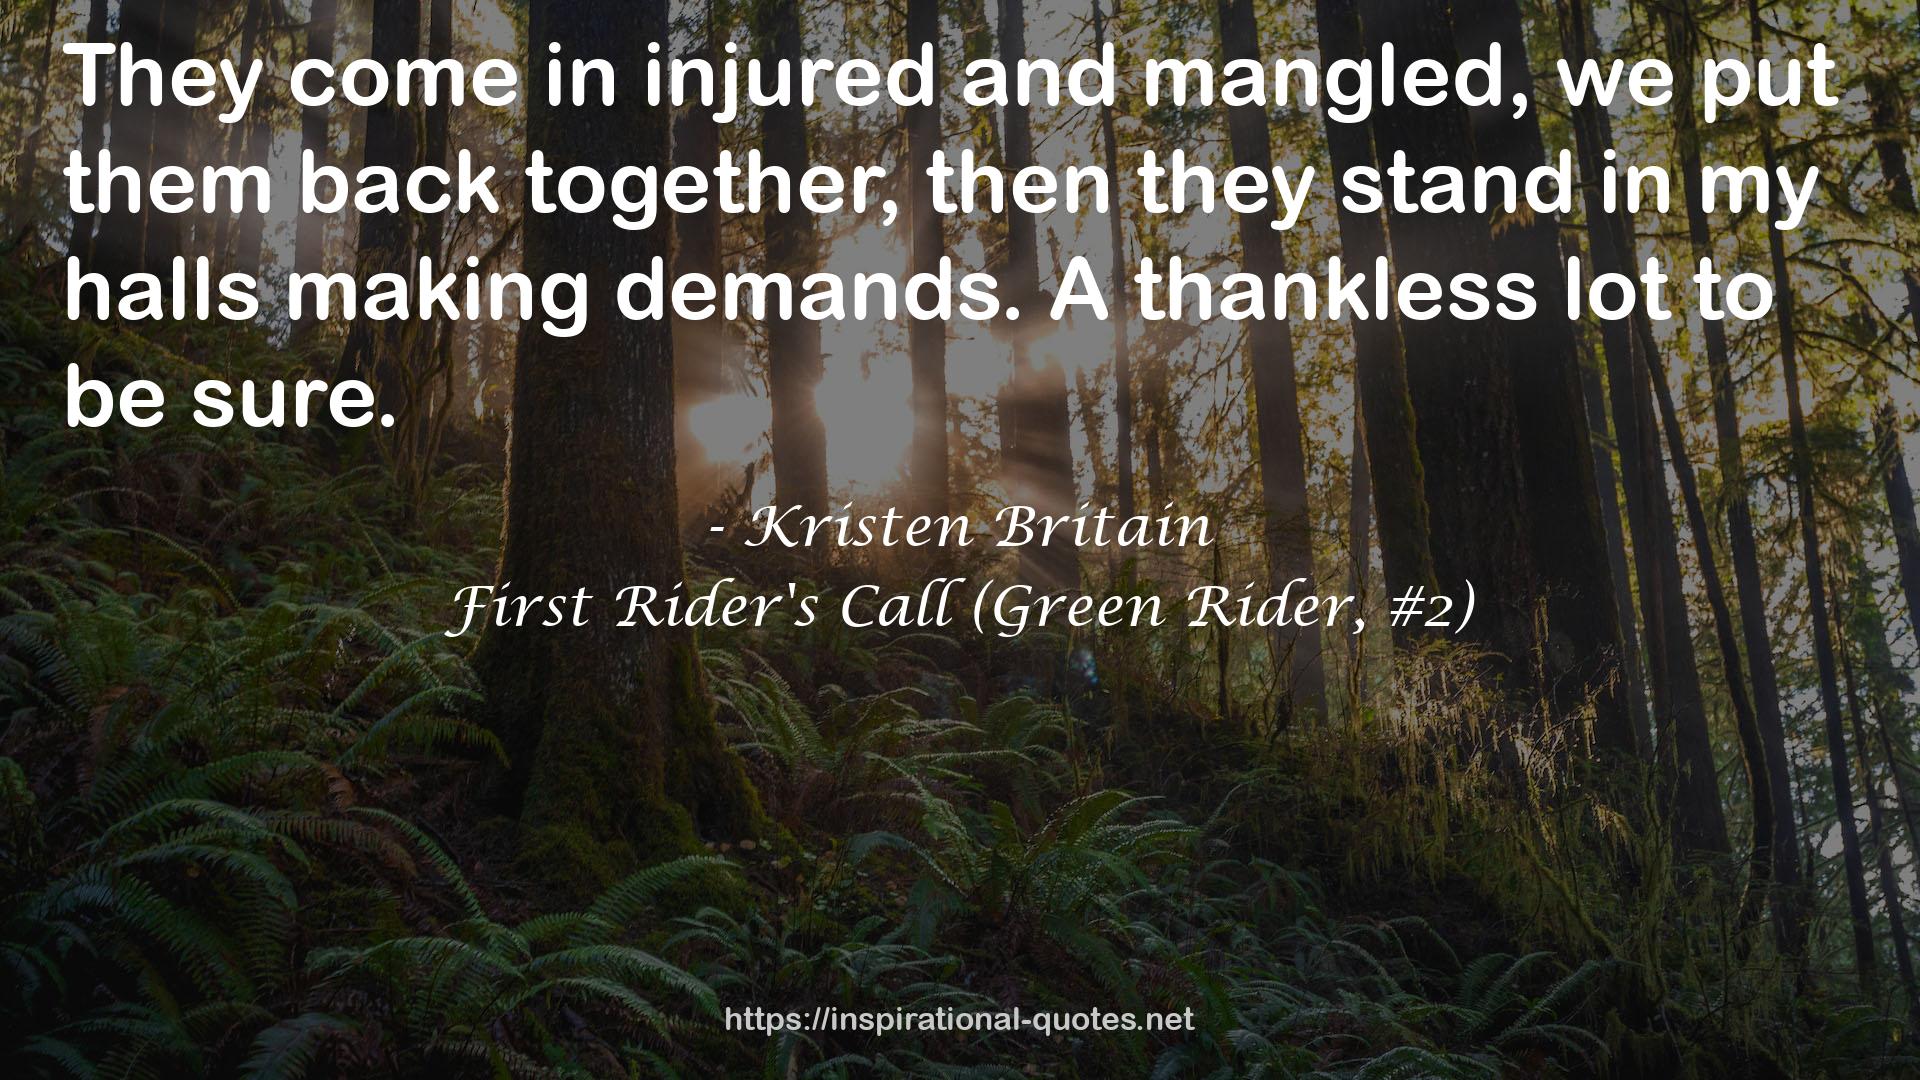 First Rider's Call (Green Rider, #2) QUOTES